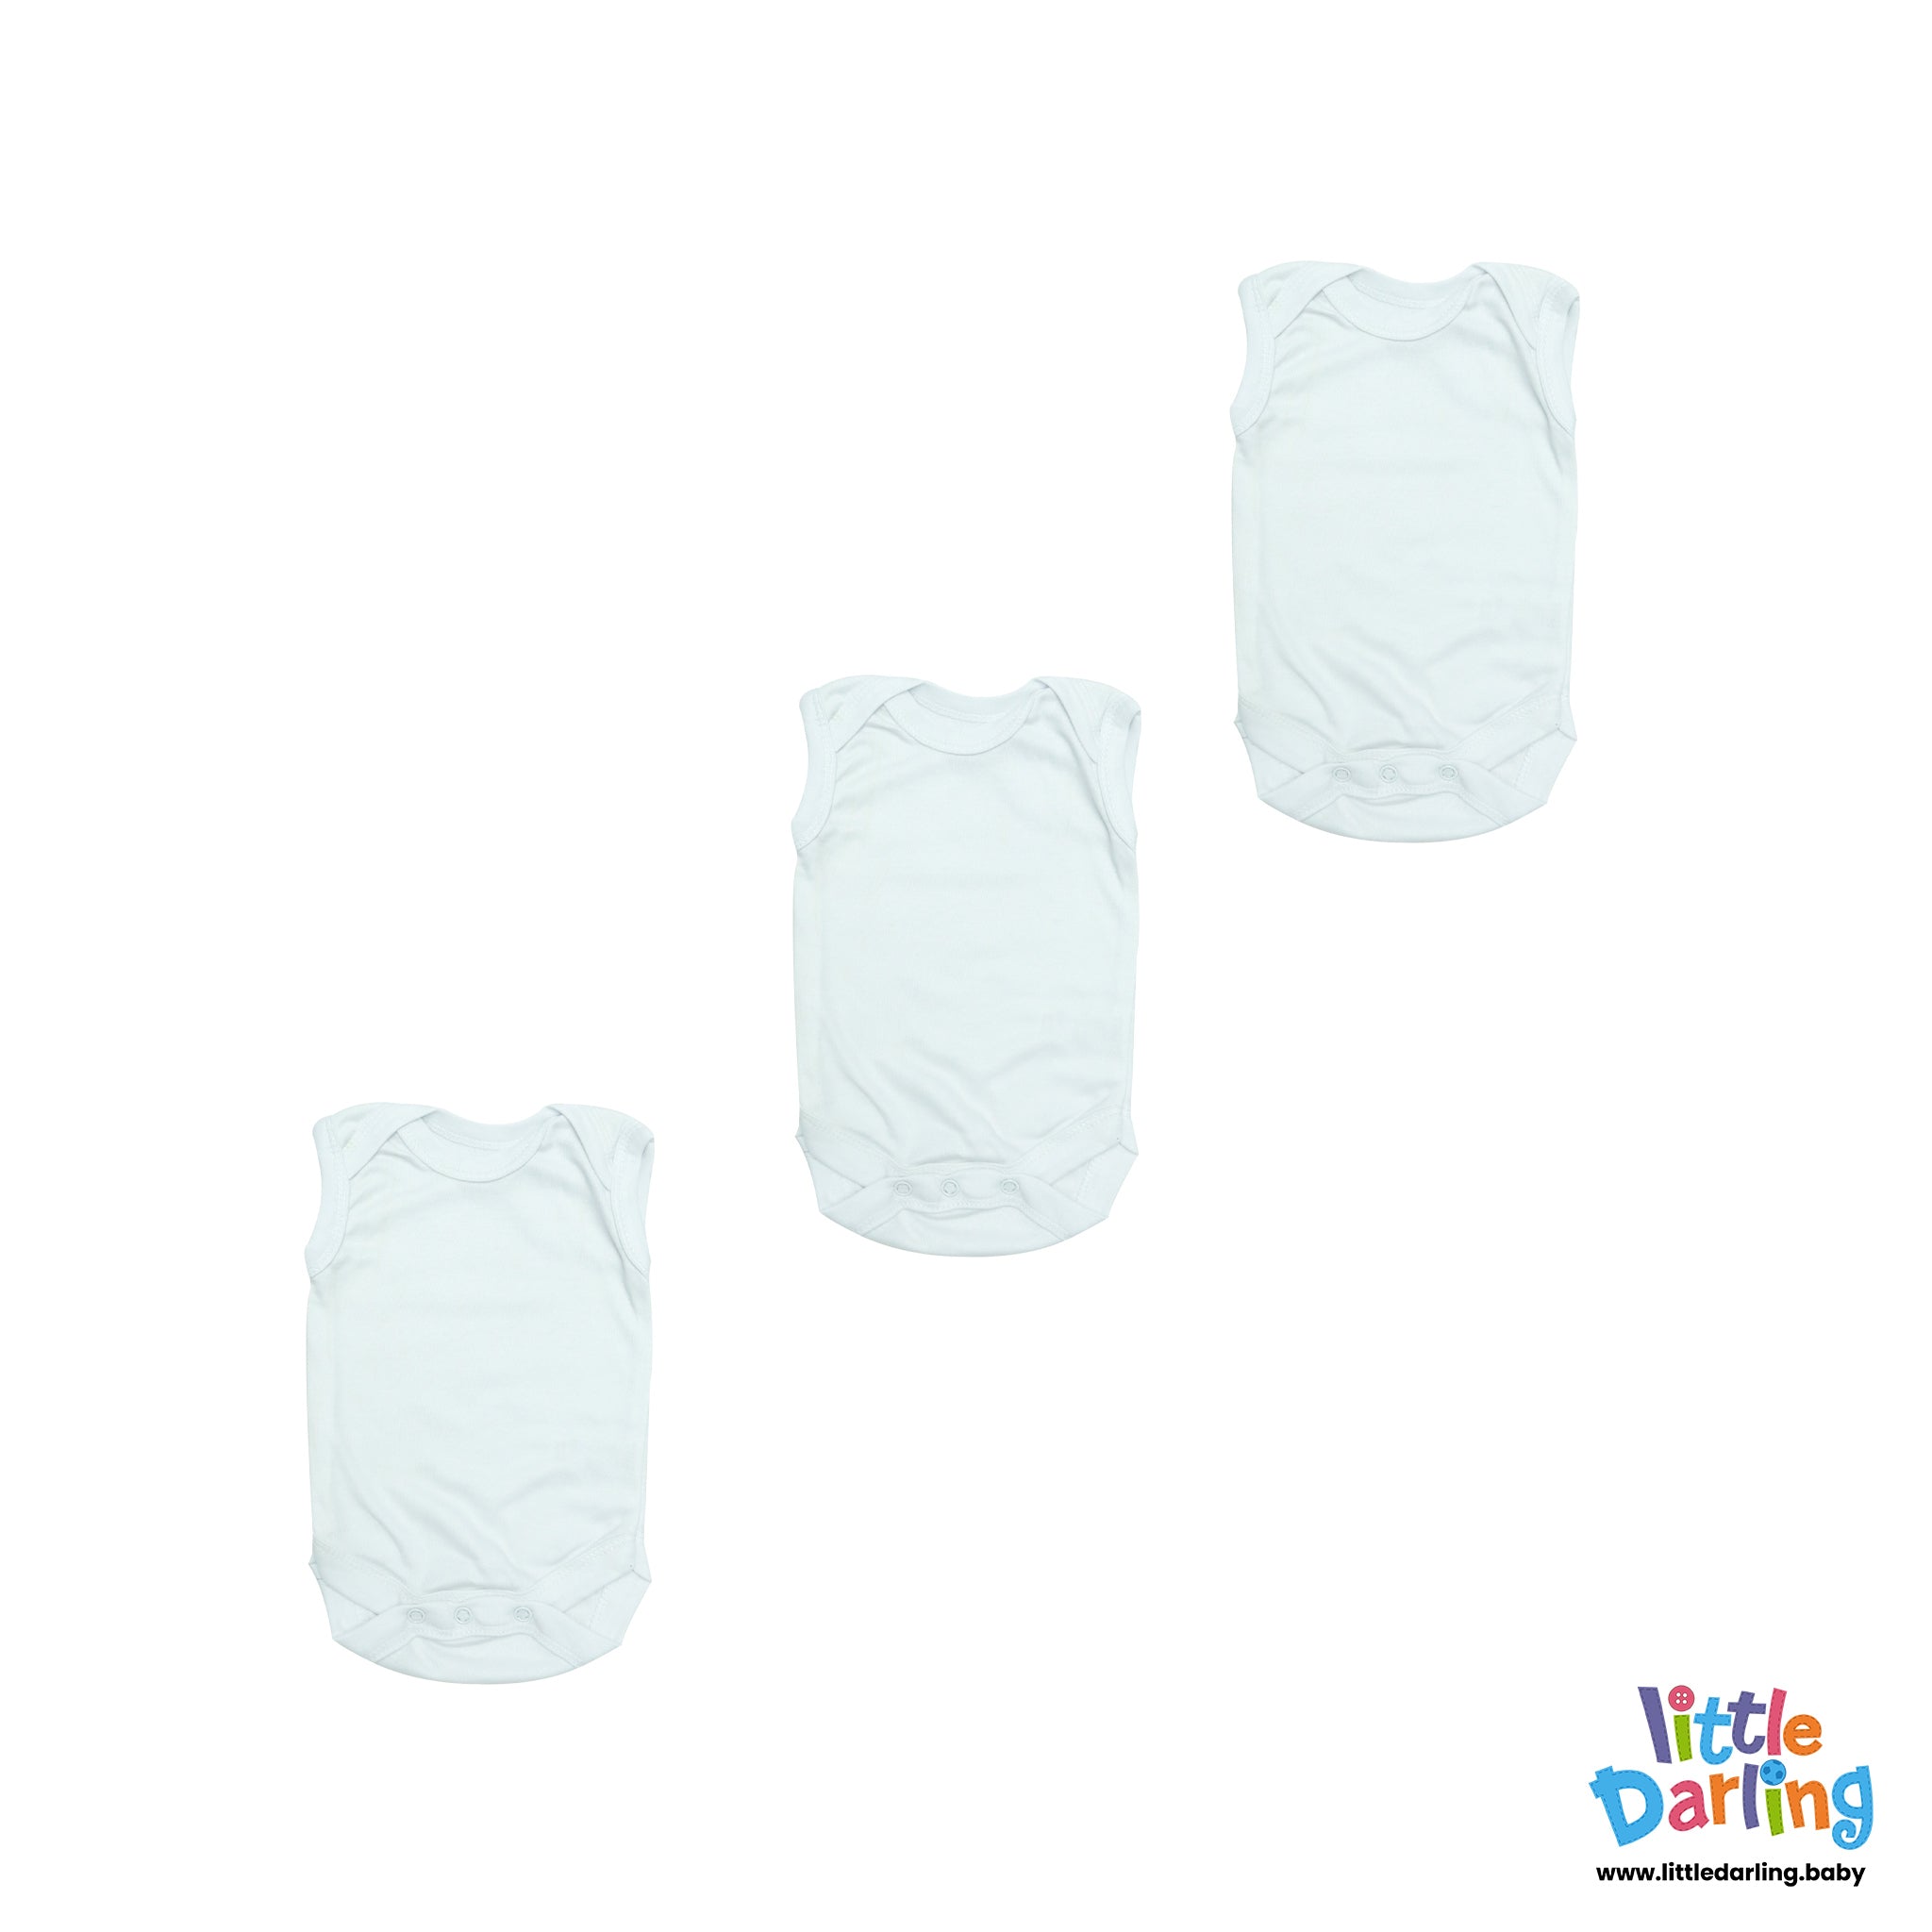 Bodysuit Pack Of 3 Sleeveless White Color by Little Darling